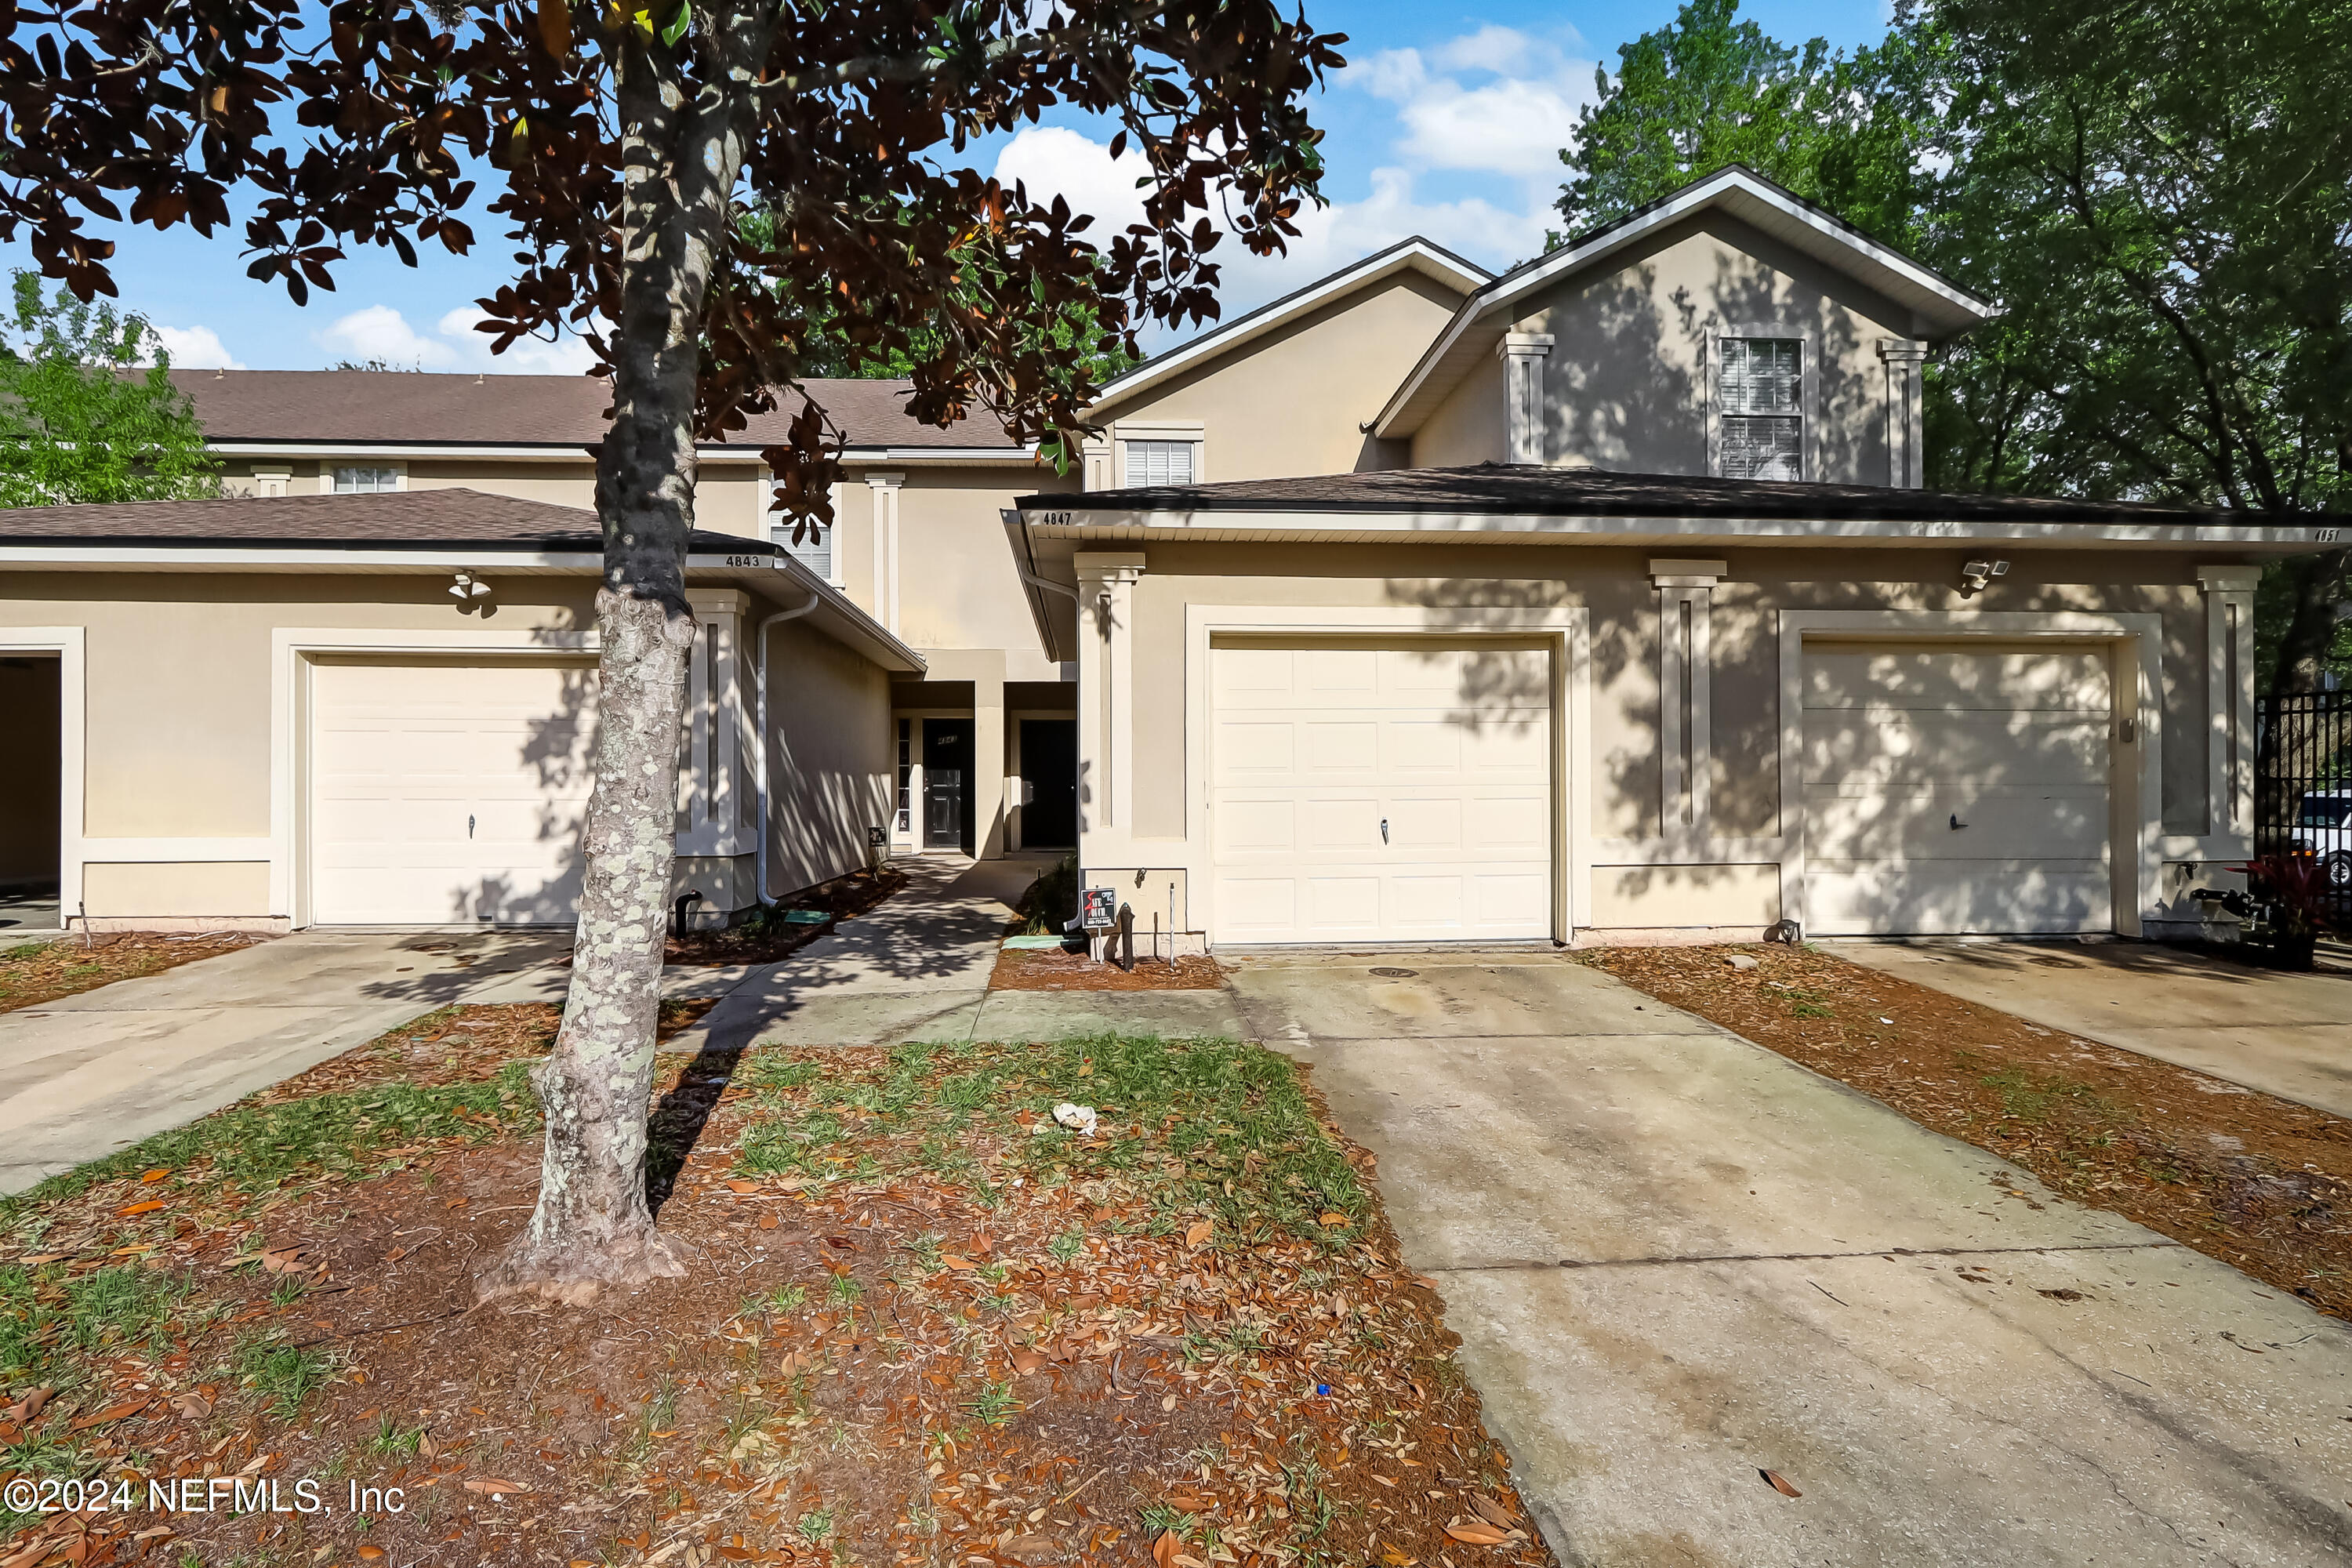 View Jacksonville, FL 32210 townhome